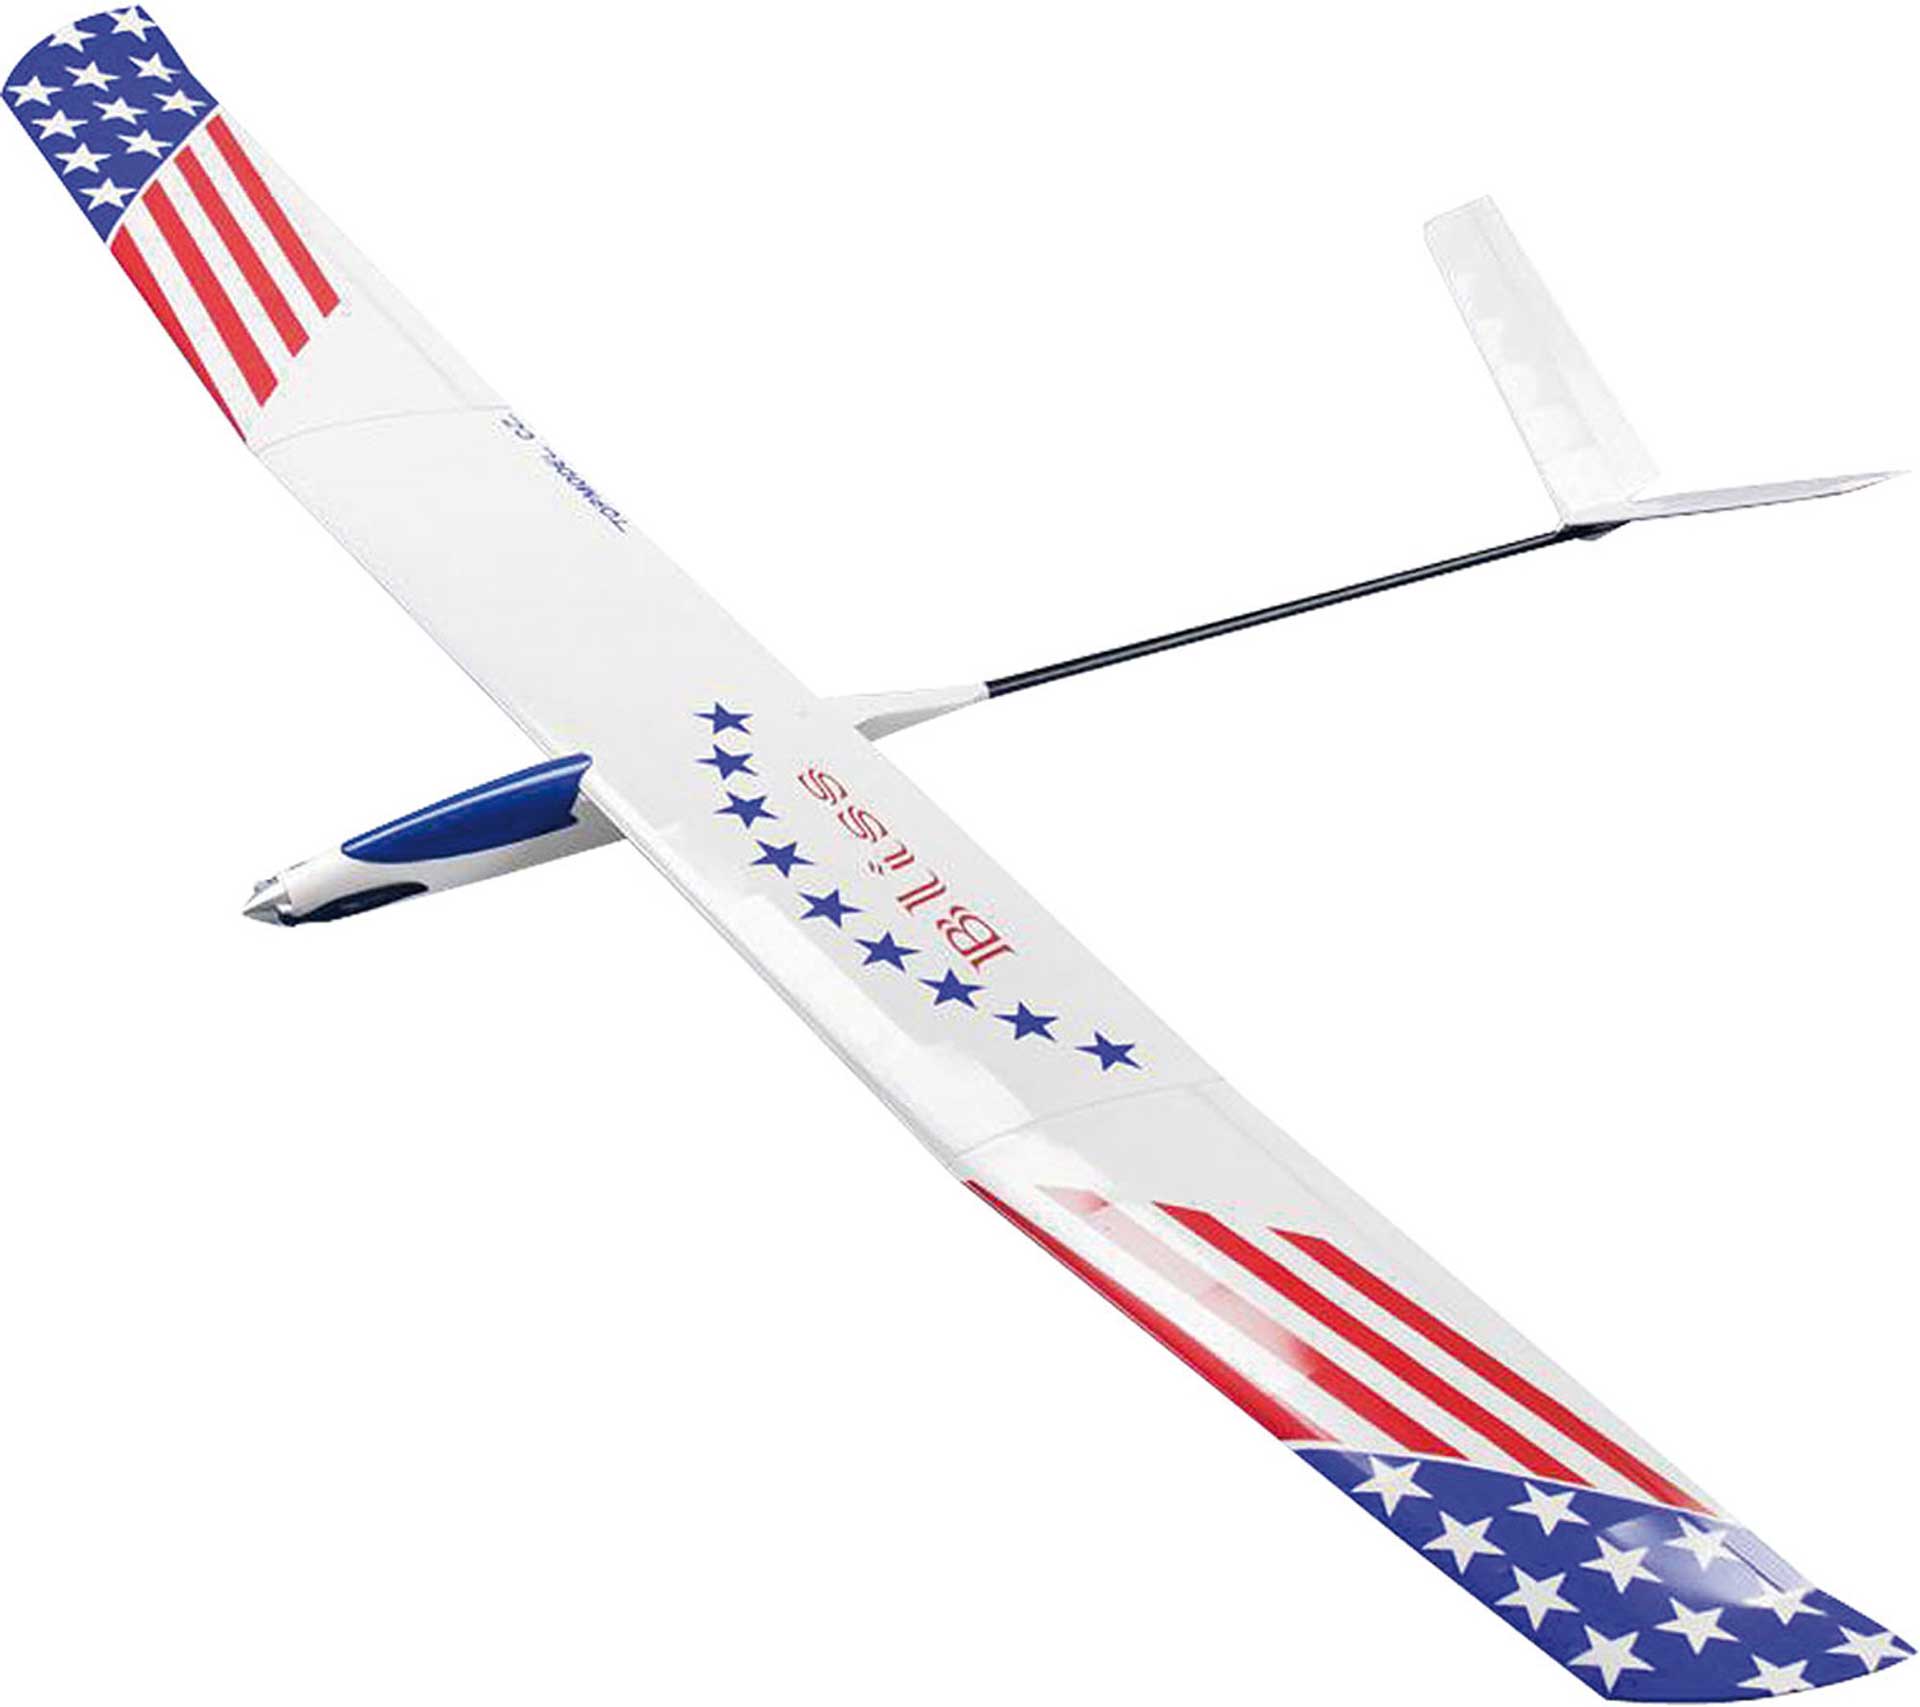 TOPMODEL BLISS ELECTRO WITH GRP FUSELAGE AND RIBBED WING WITH FULL COMPOSITE FUSELAGE AND FINWINGS